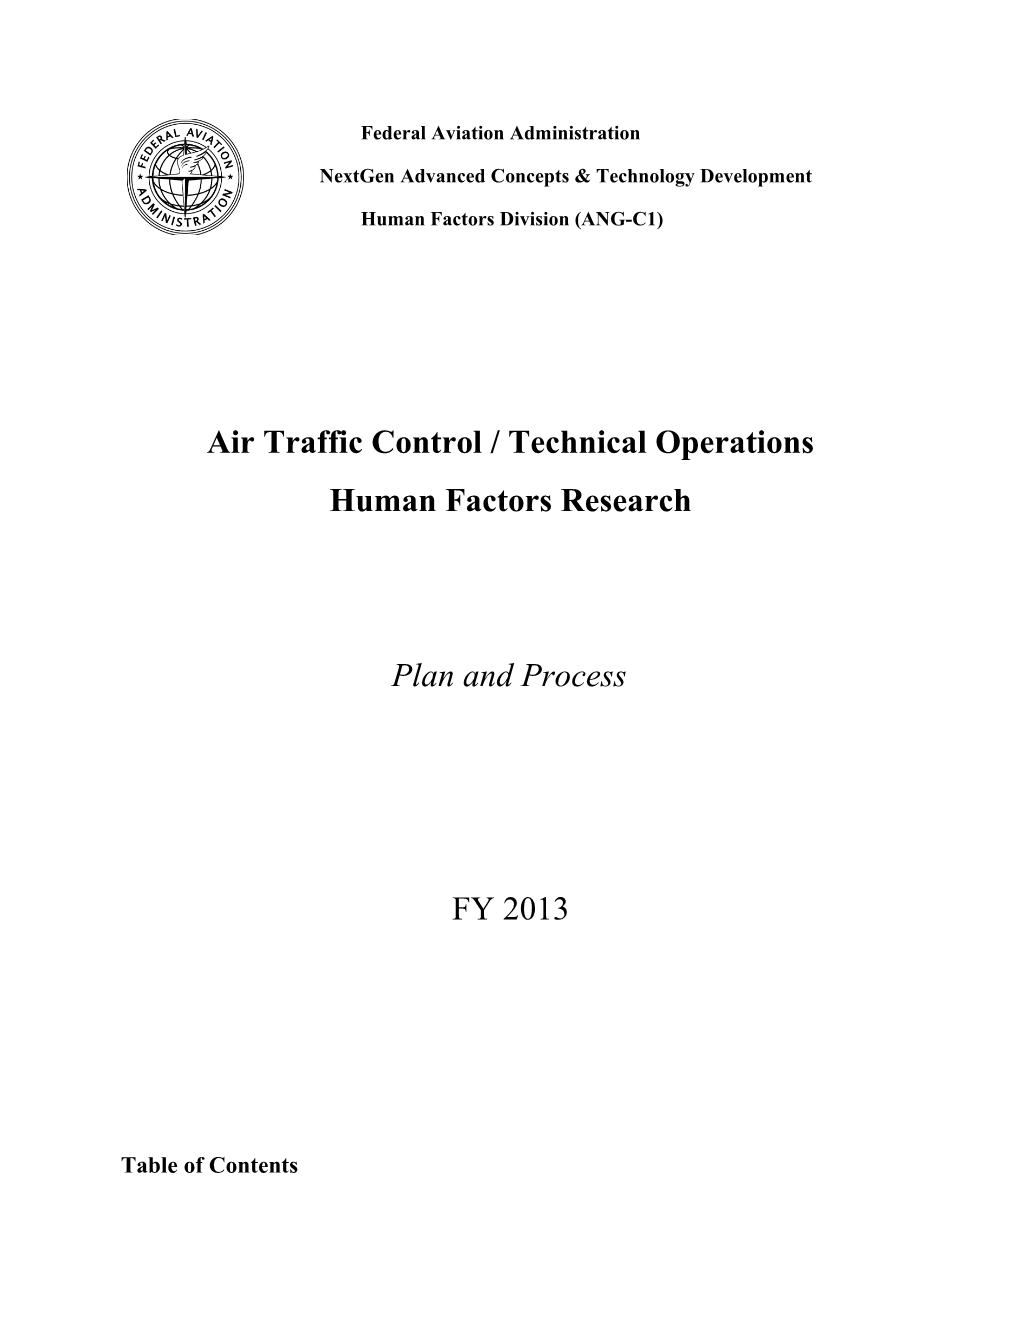 Air Traffic Control/Technical Operations Human Factors Research